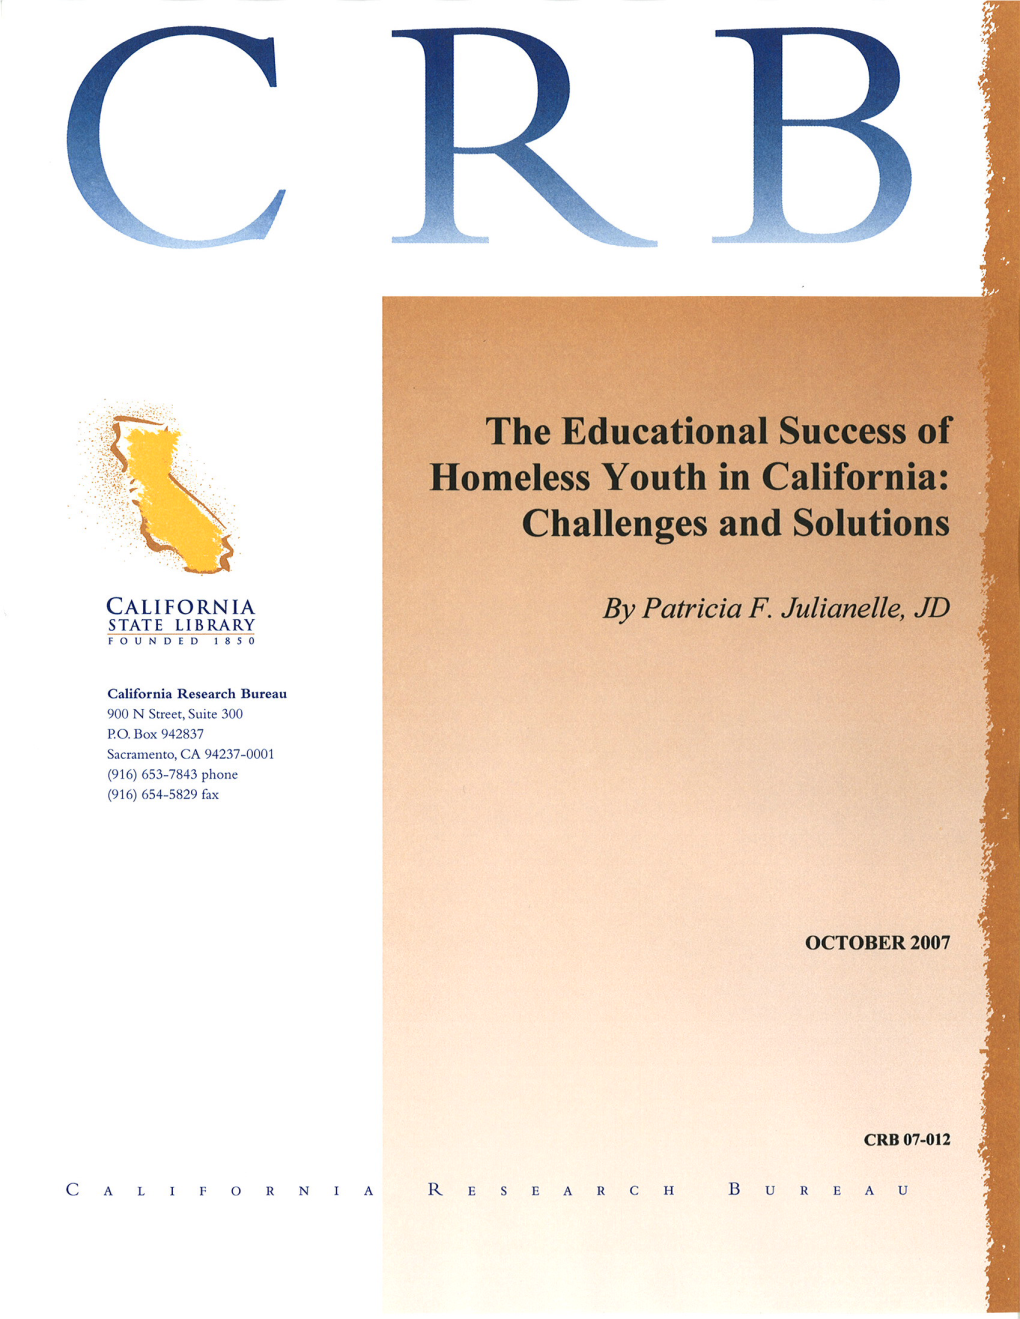 The Educational Success of Homeless Youth in California: Challenges and Solutions